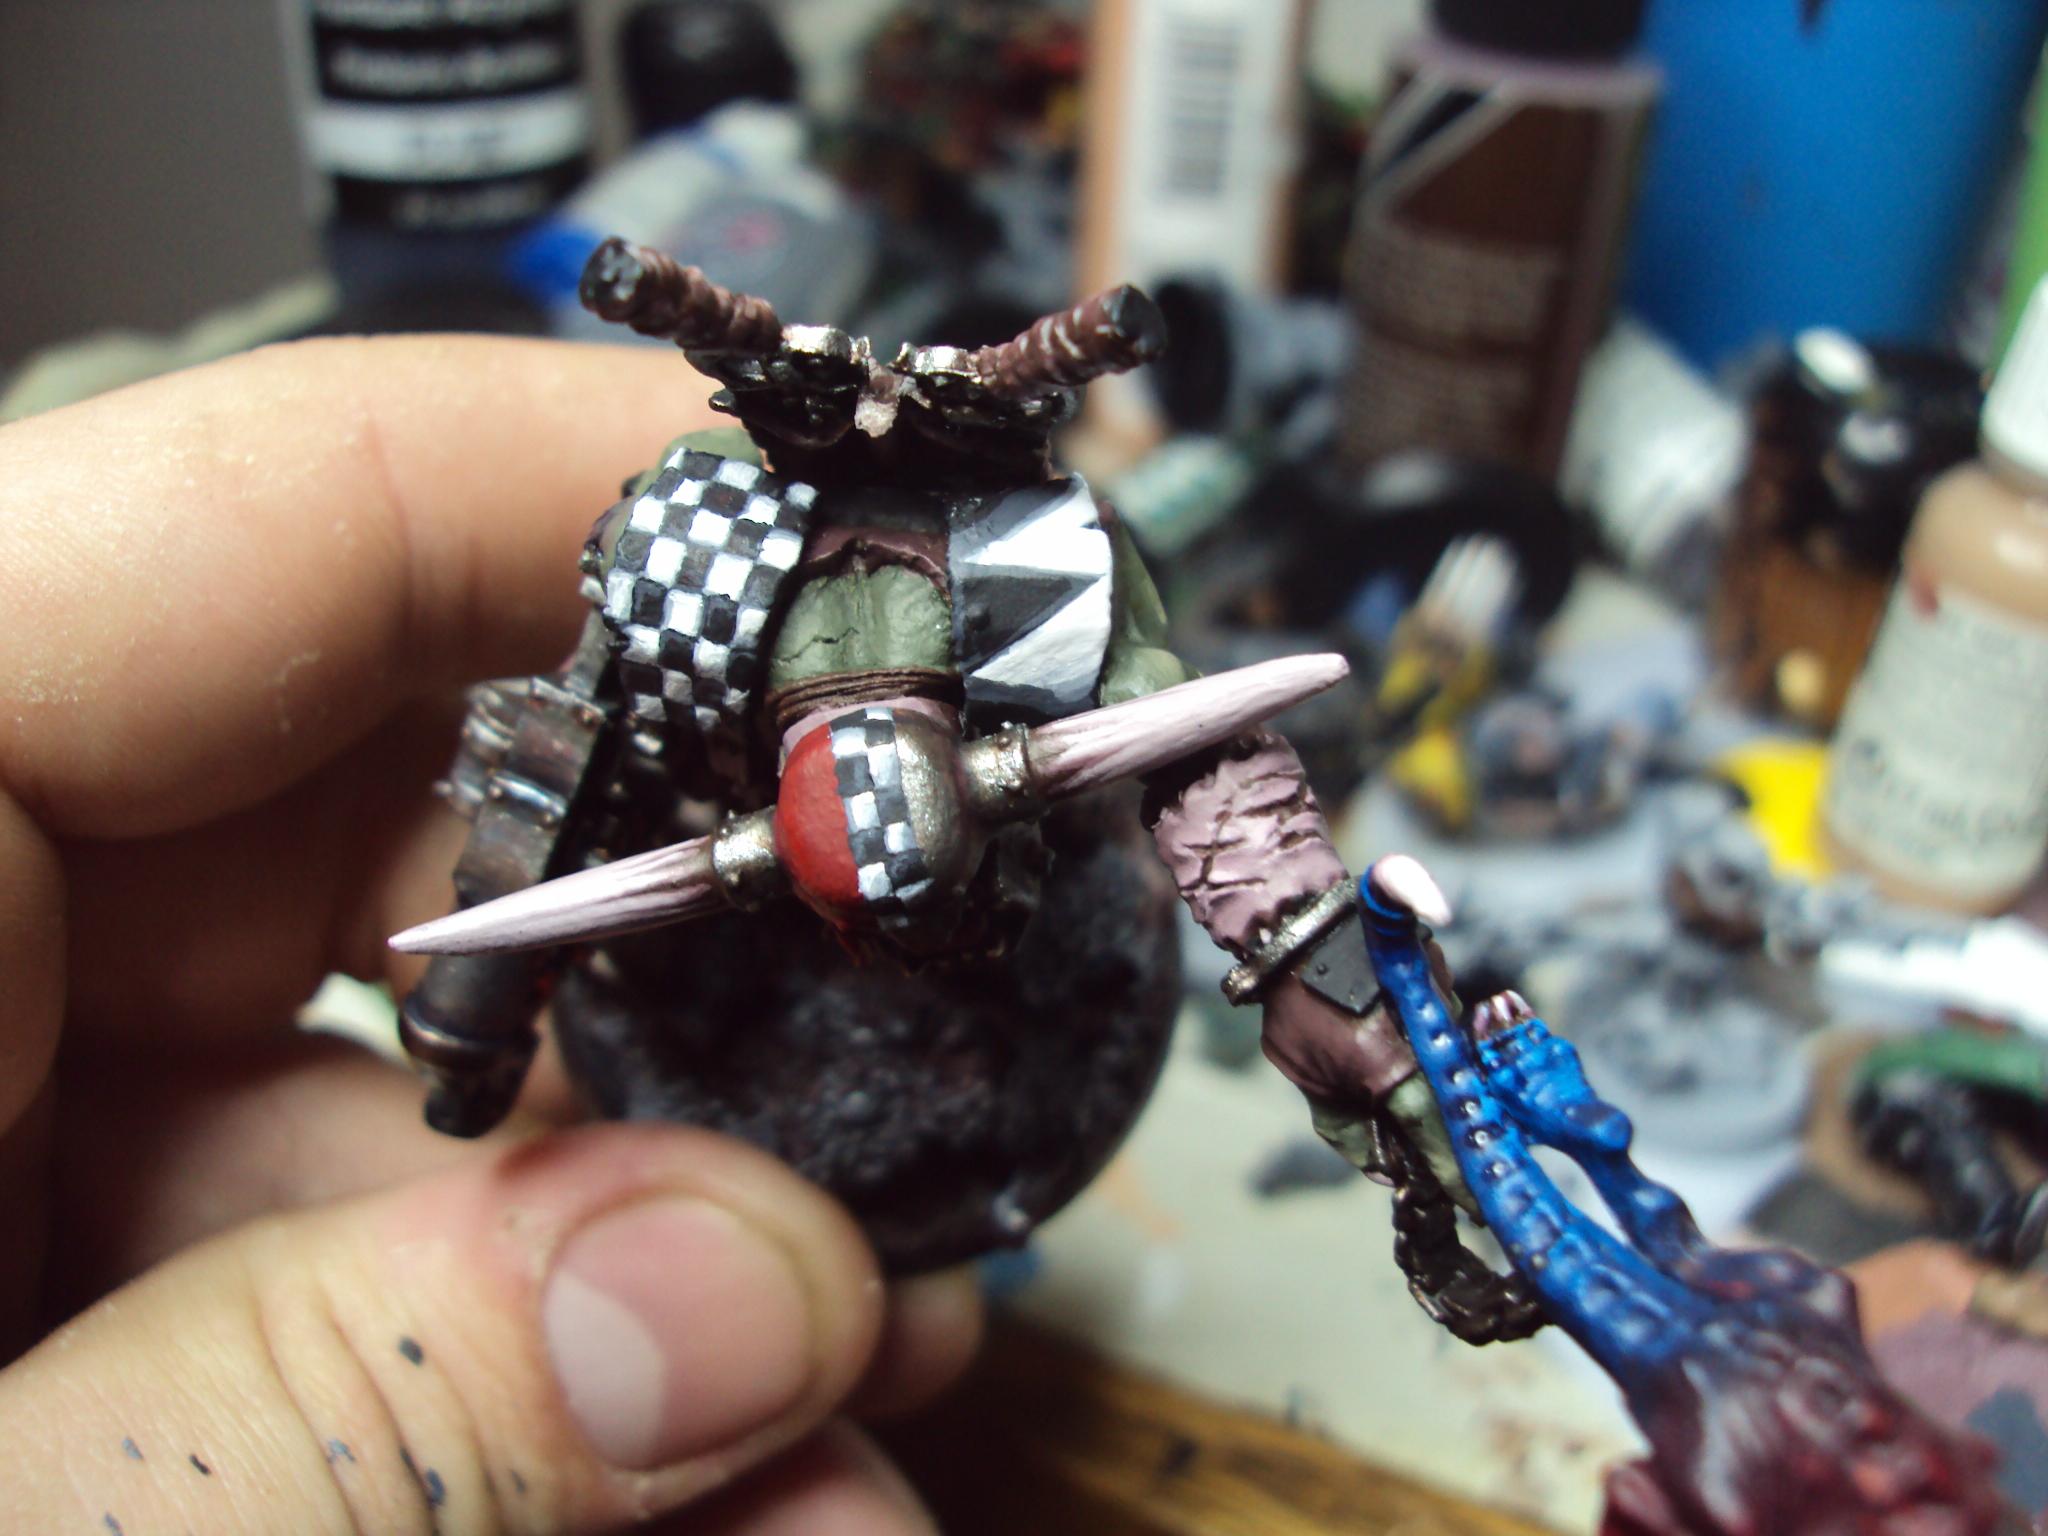 After adding more white paint just the top of the square, followed by a true skull white highlight at just the corners